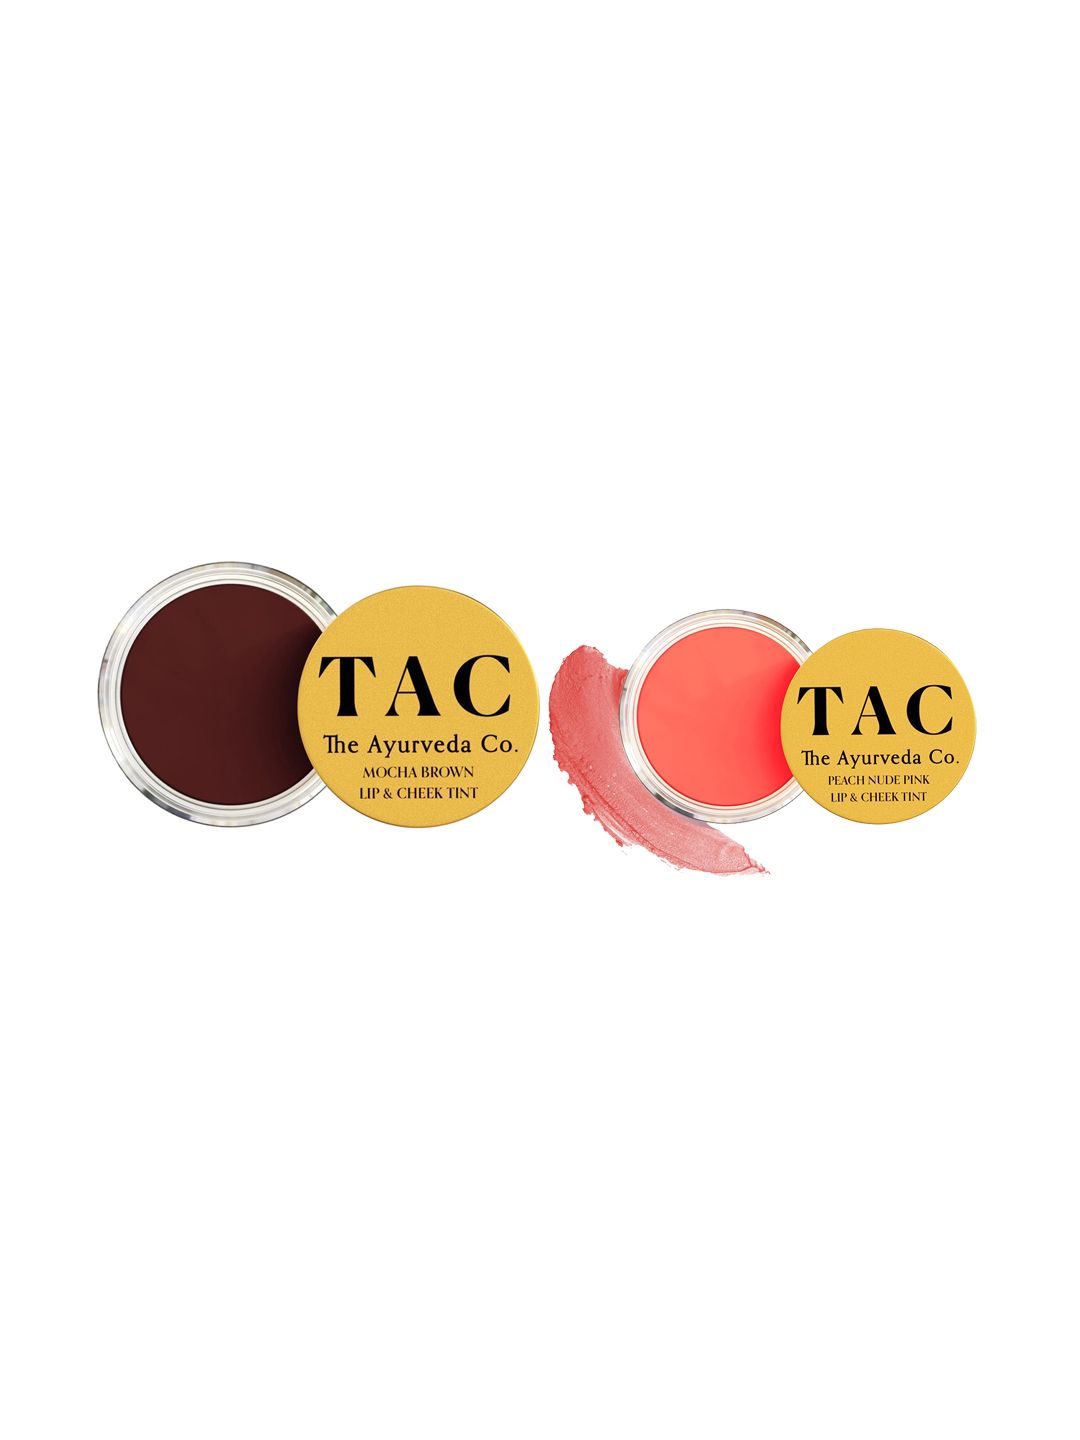 TAC - The Ayurveda Co. Set of 2 Lip & Cheek Tints - Mocha Brown & Peach Nude Pink Price in India